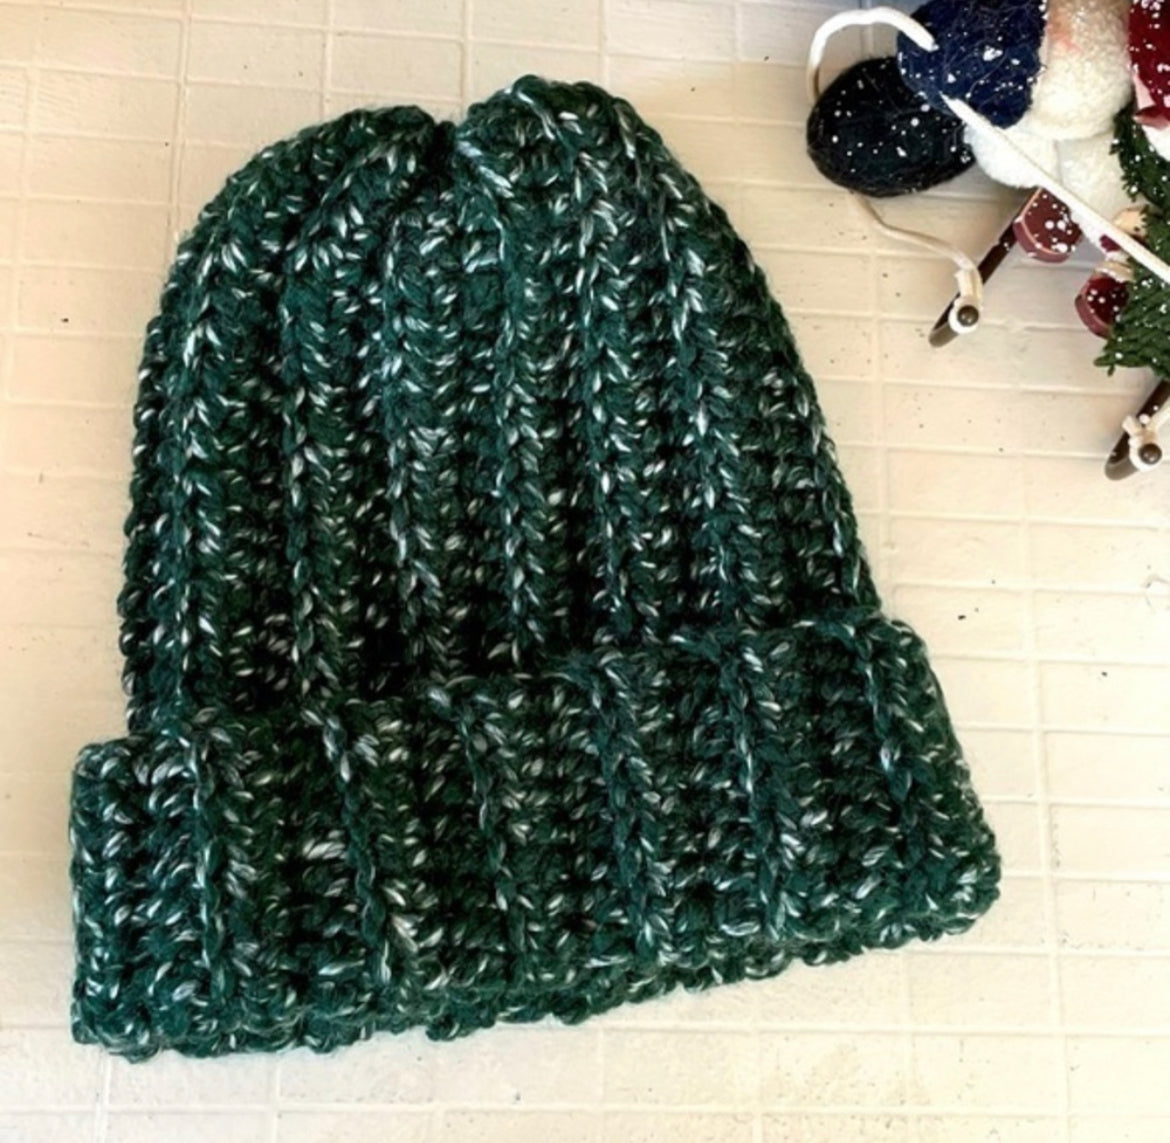 Extra Warm Ribbed Cable Knit Hat Forest Green & White Marbled Hand Crocheted Beanie 21" Winter Unisex Outdoor Stretch Adjustable Cuff